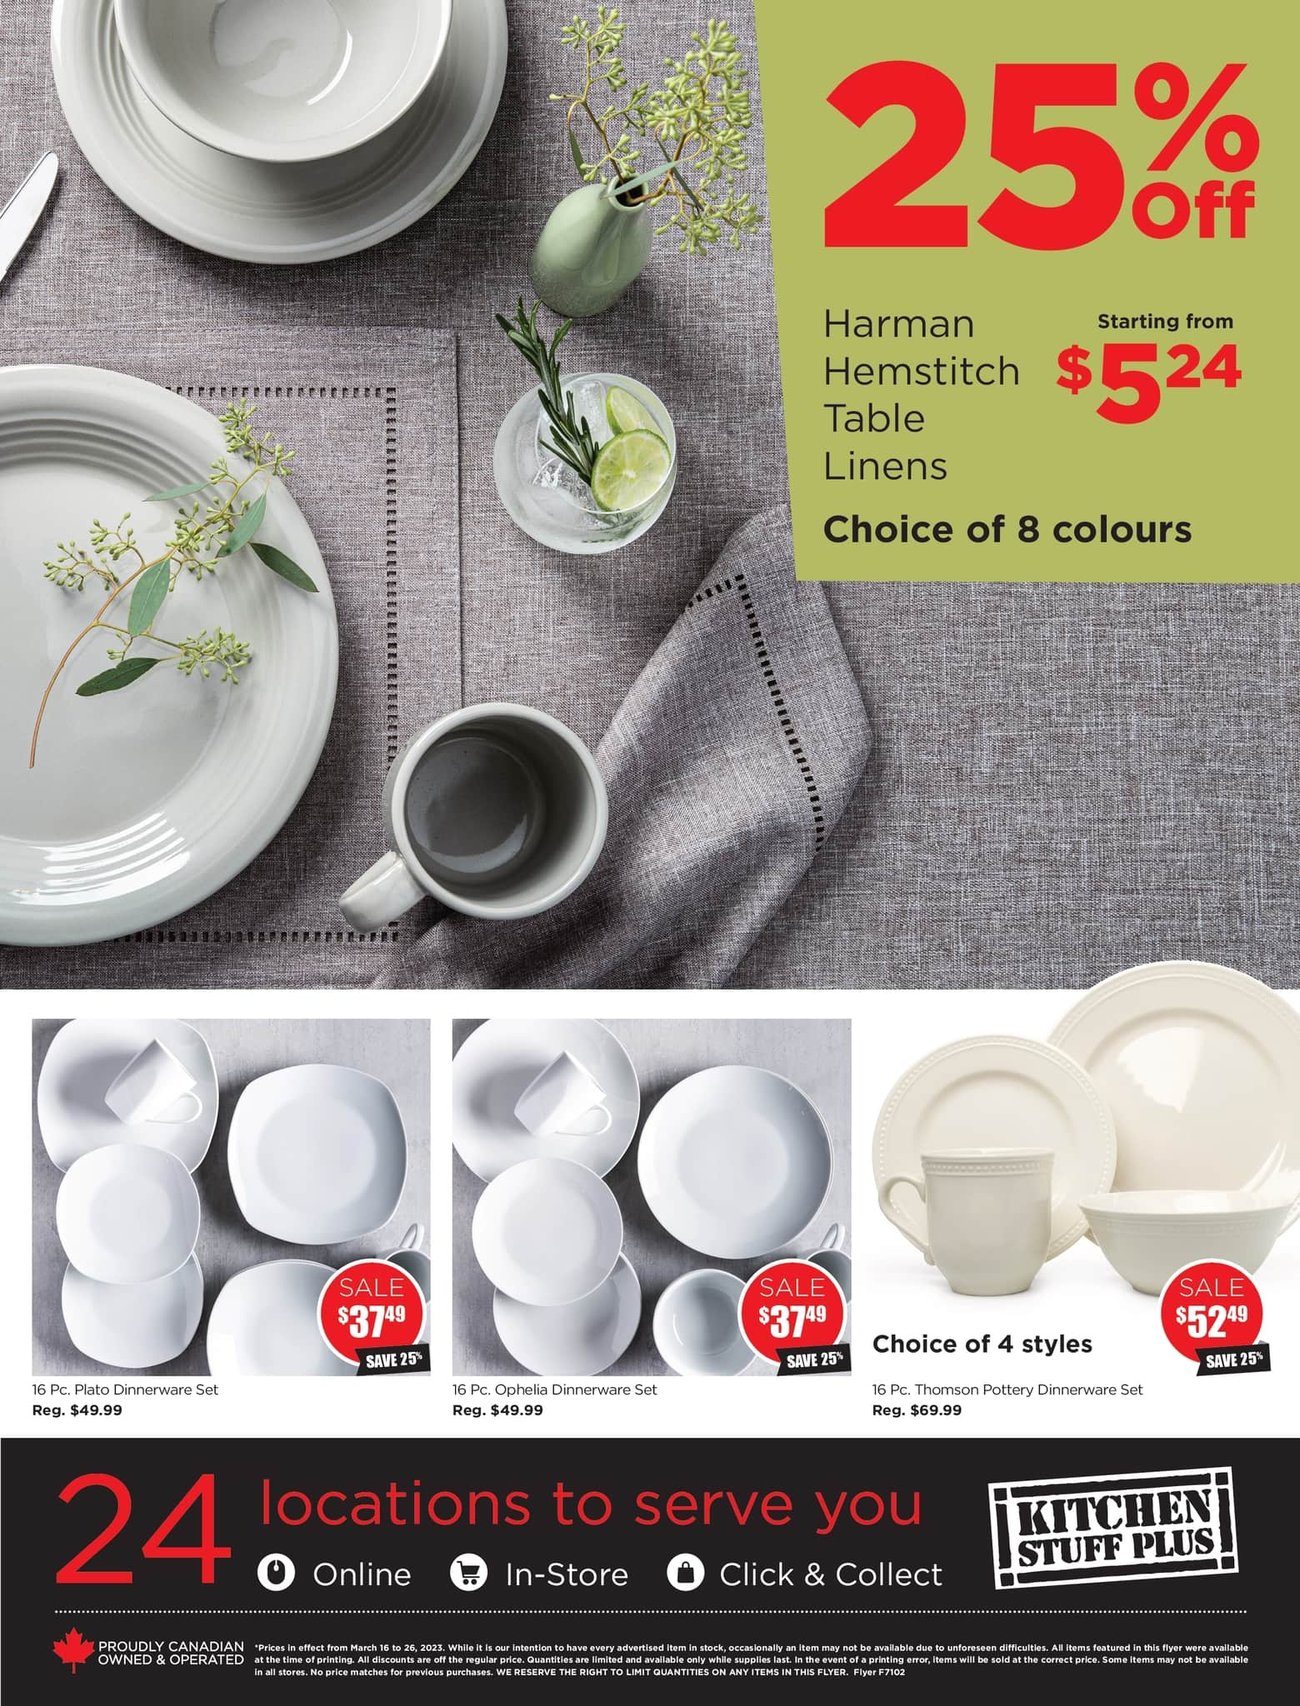 Kitchen Stuff Plus - Everything Cooking Sale - Page 20